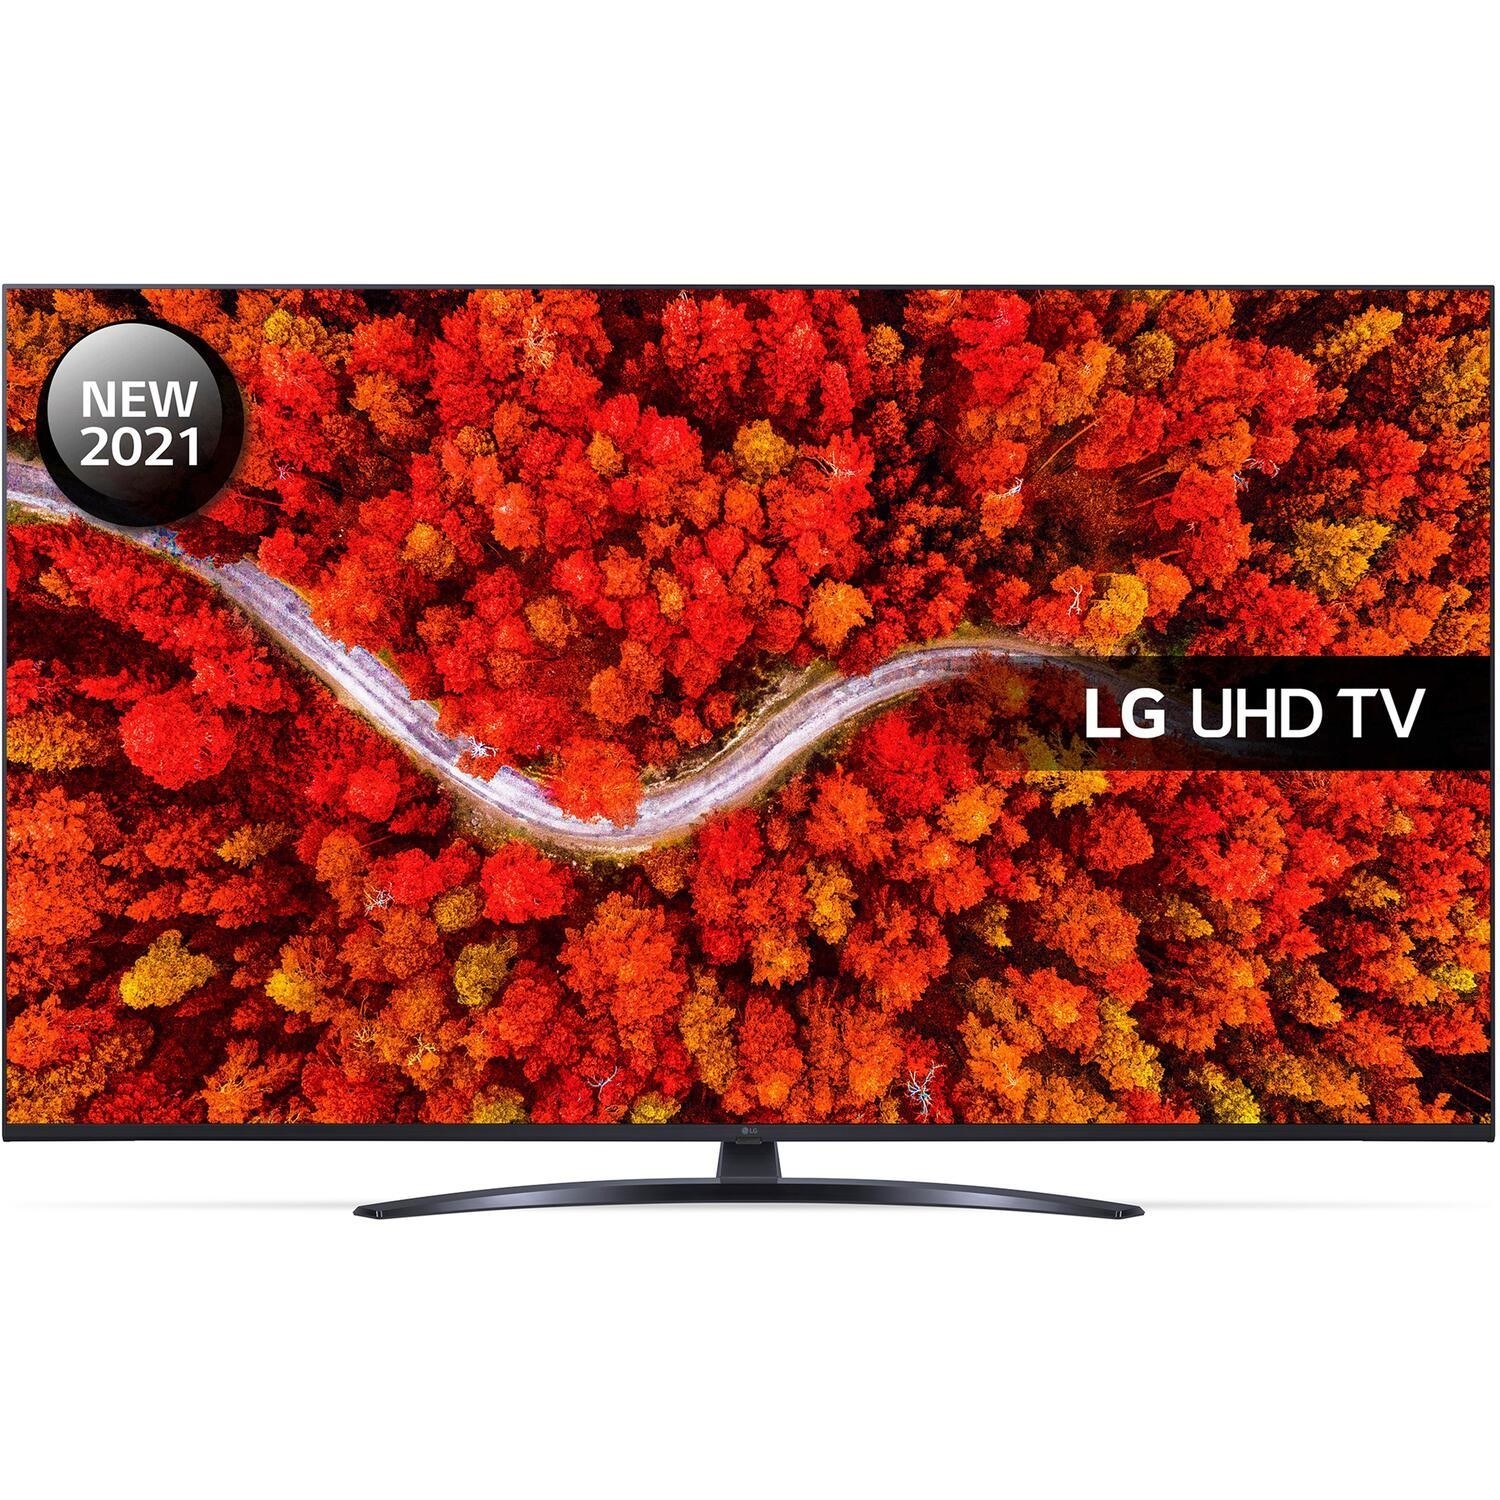 LG UP81 55 Inch LED 4K HDR Freeview Play and Freesat HD Smart TV